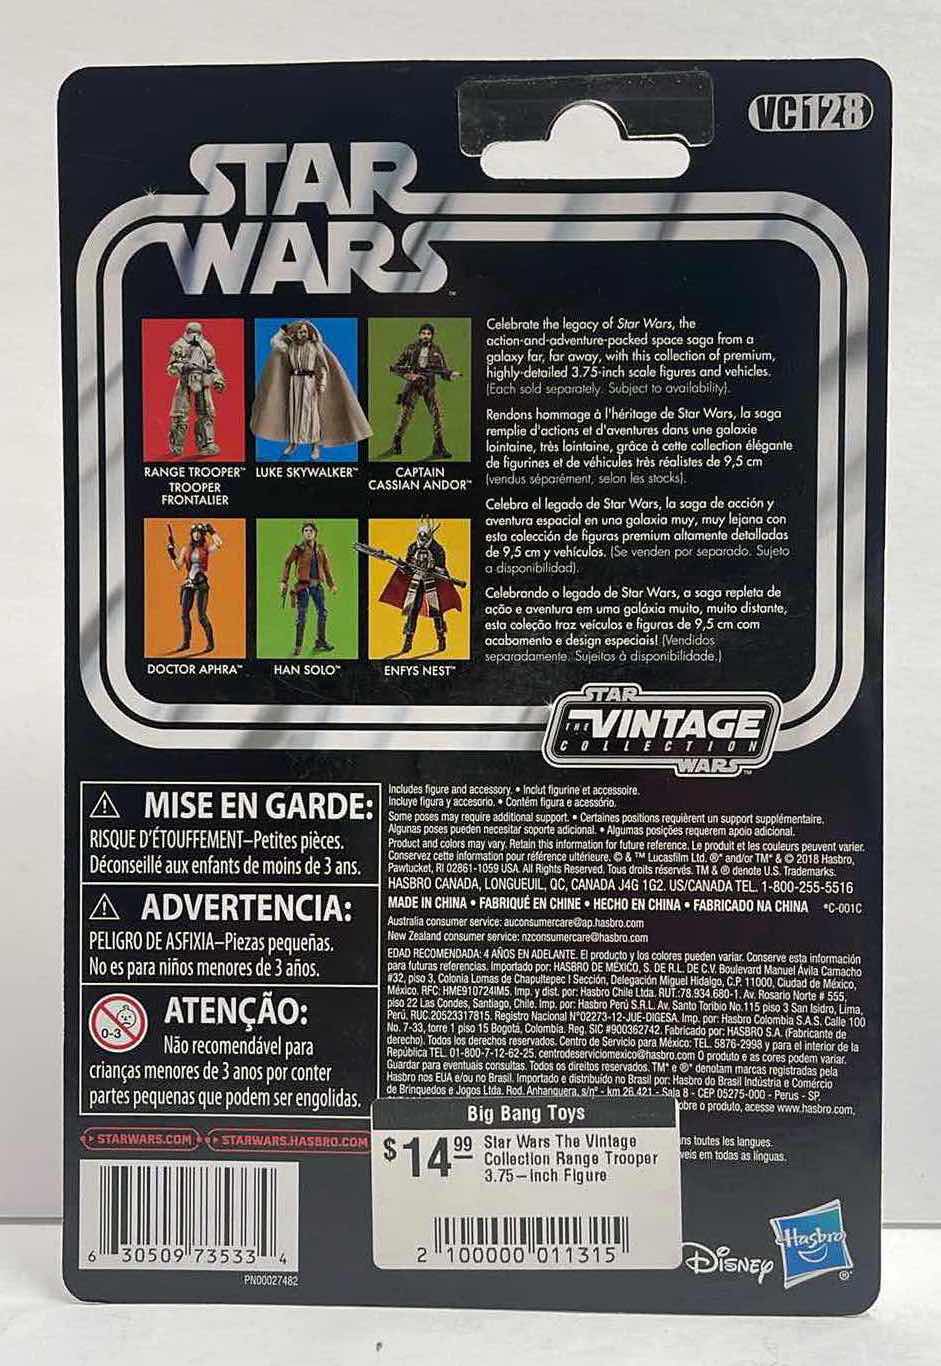 Photo 2 of NIB STAR WARS THE VINTAGE COLLECTION “RANGE TROOPER” ACTION FIGURE – RETAIL PRICE $14.99